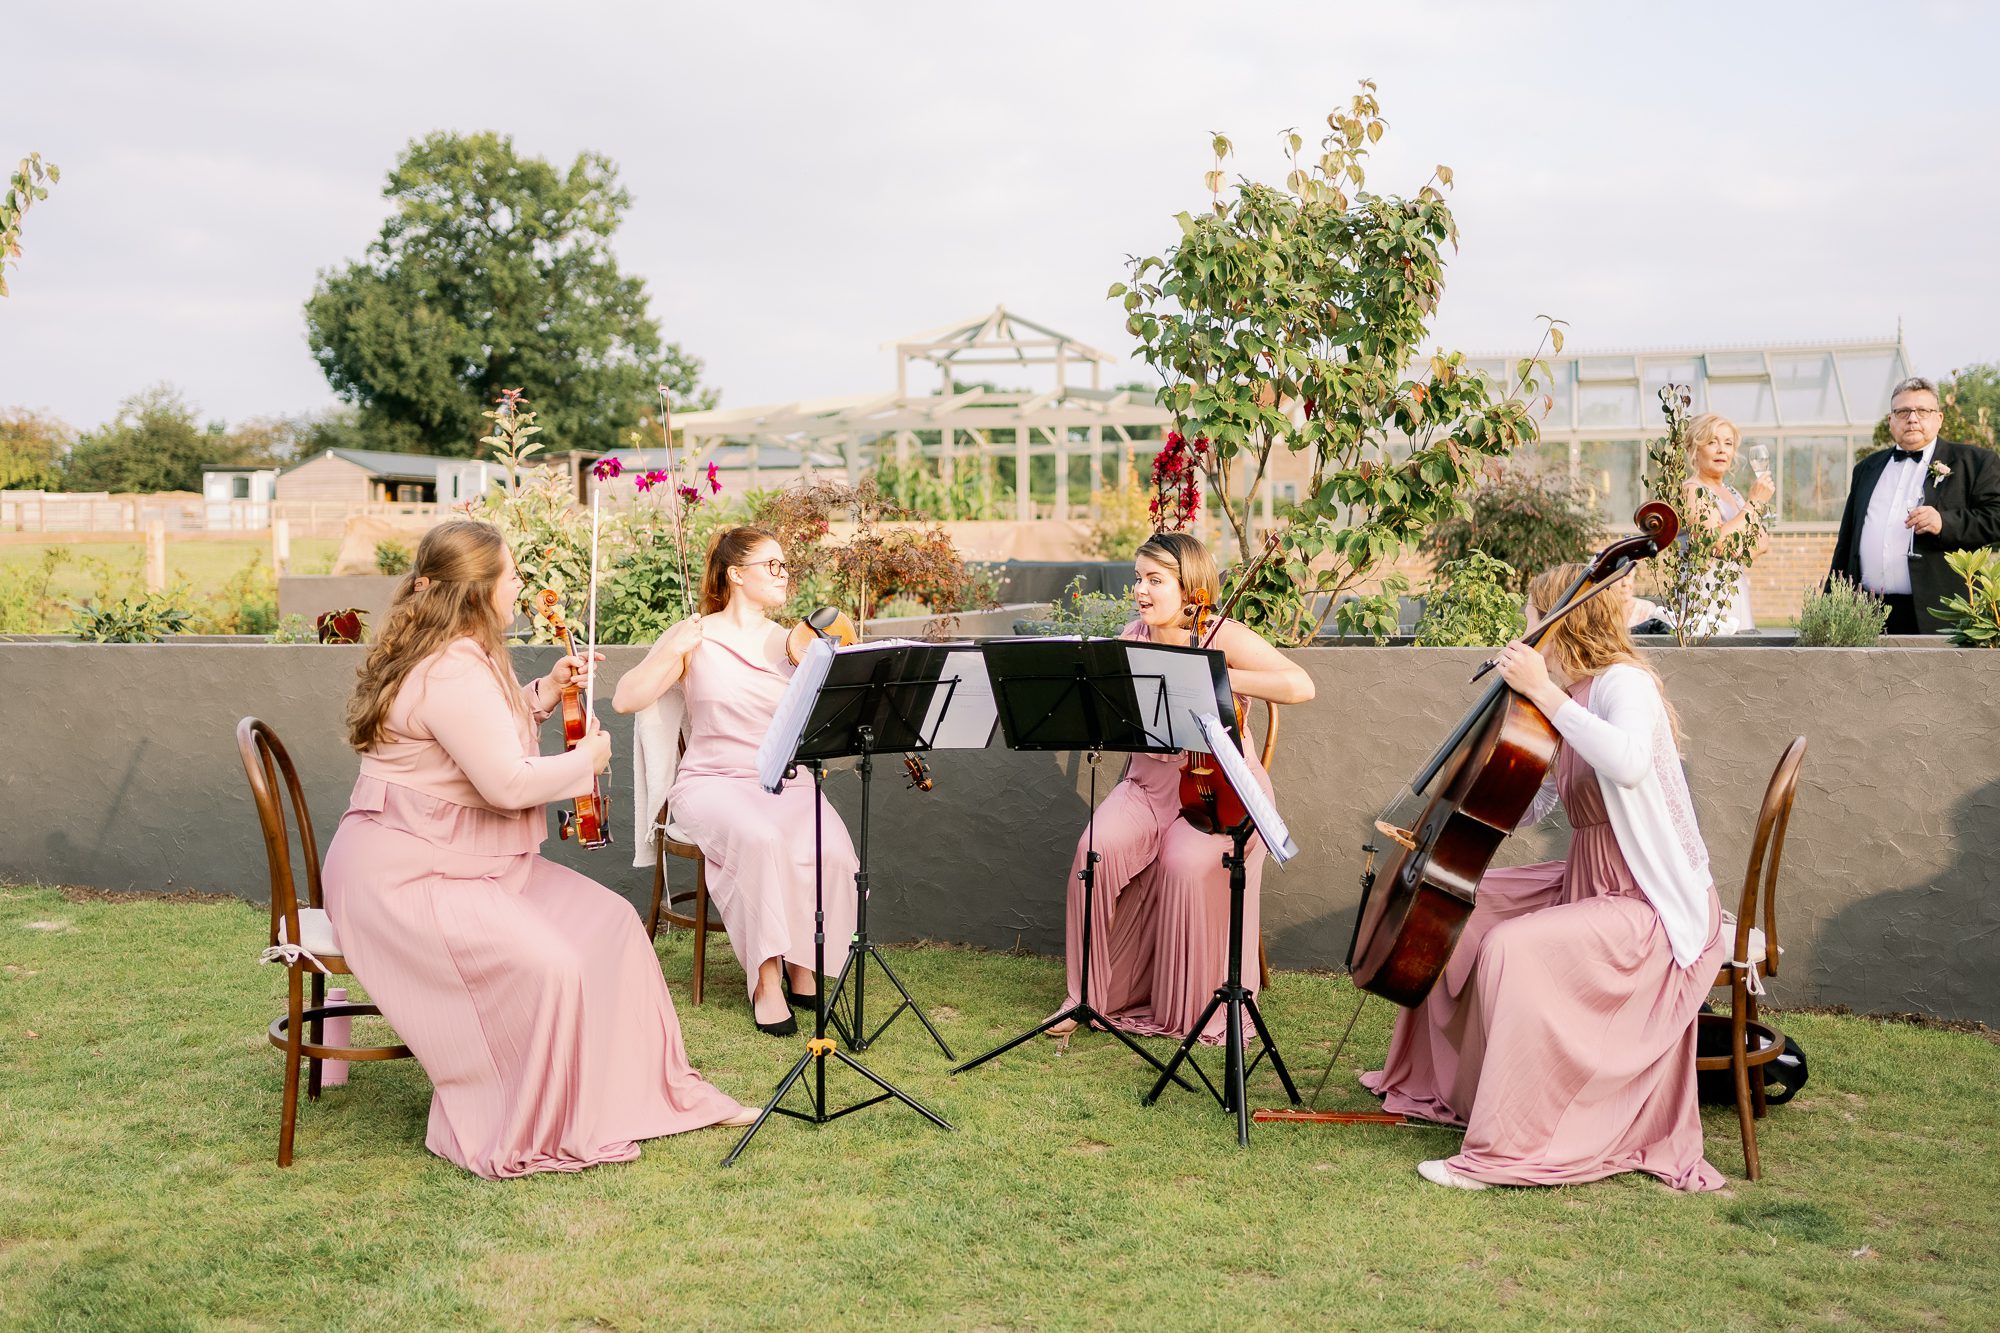 Destiny's String play at an English country wedding.